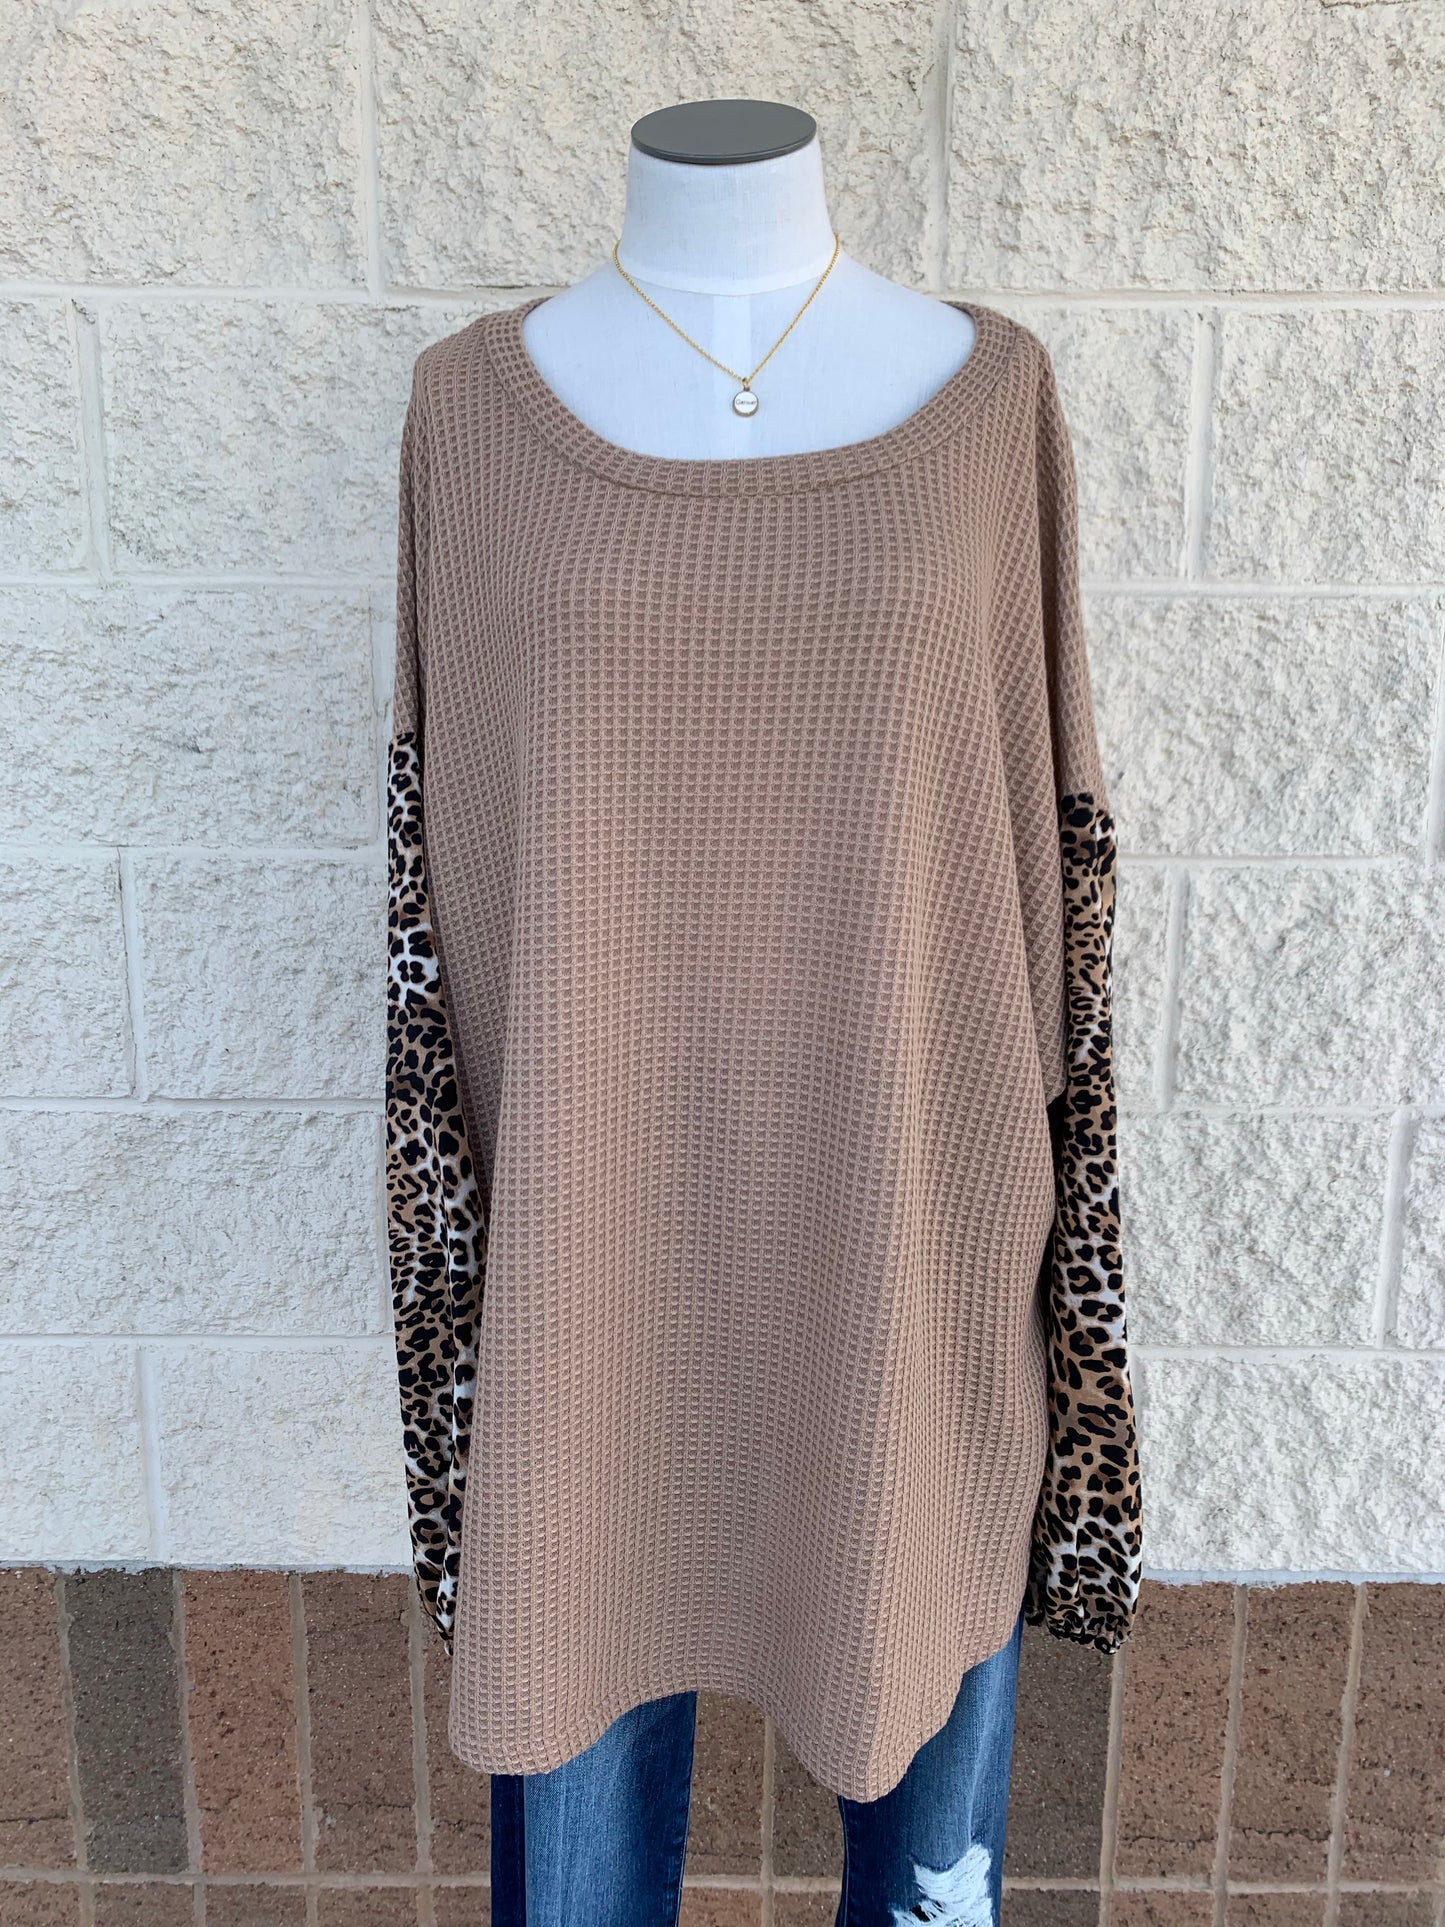 Waffle Print with Accenting Leopard Print Sleeves